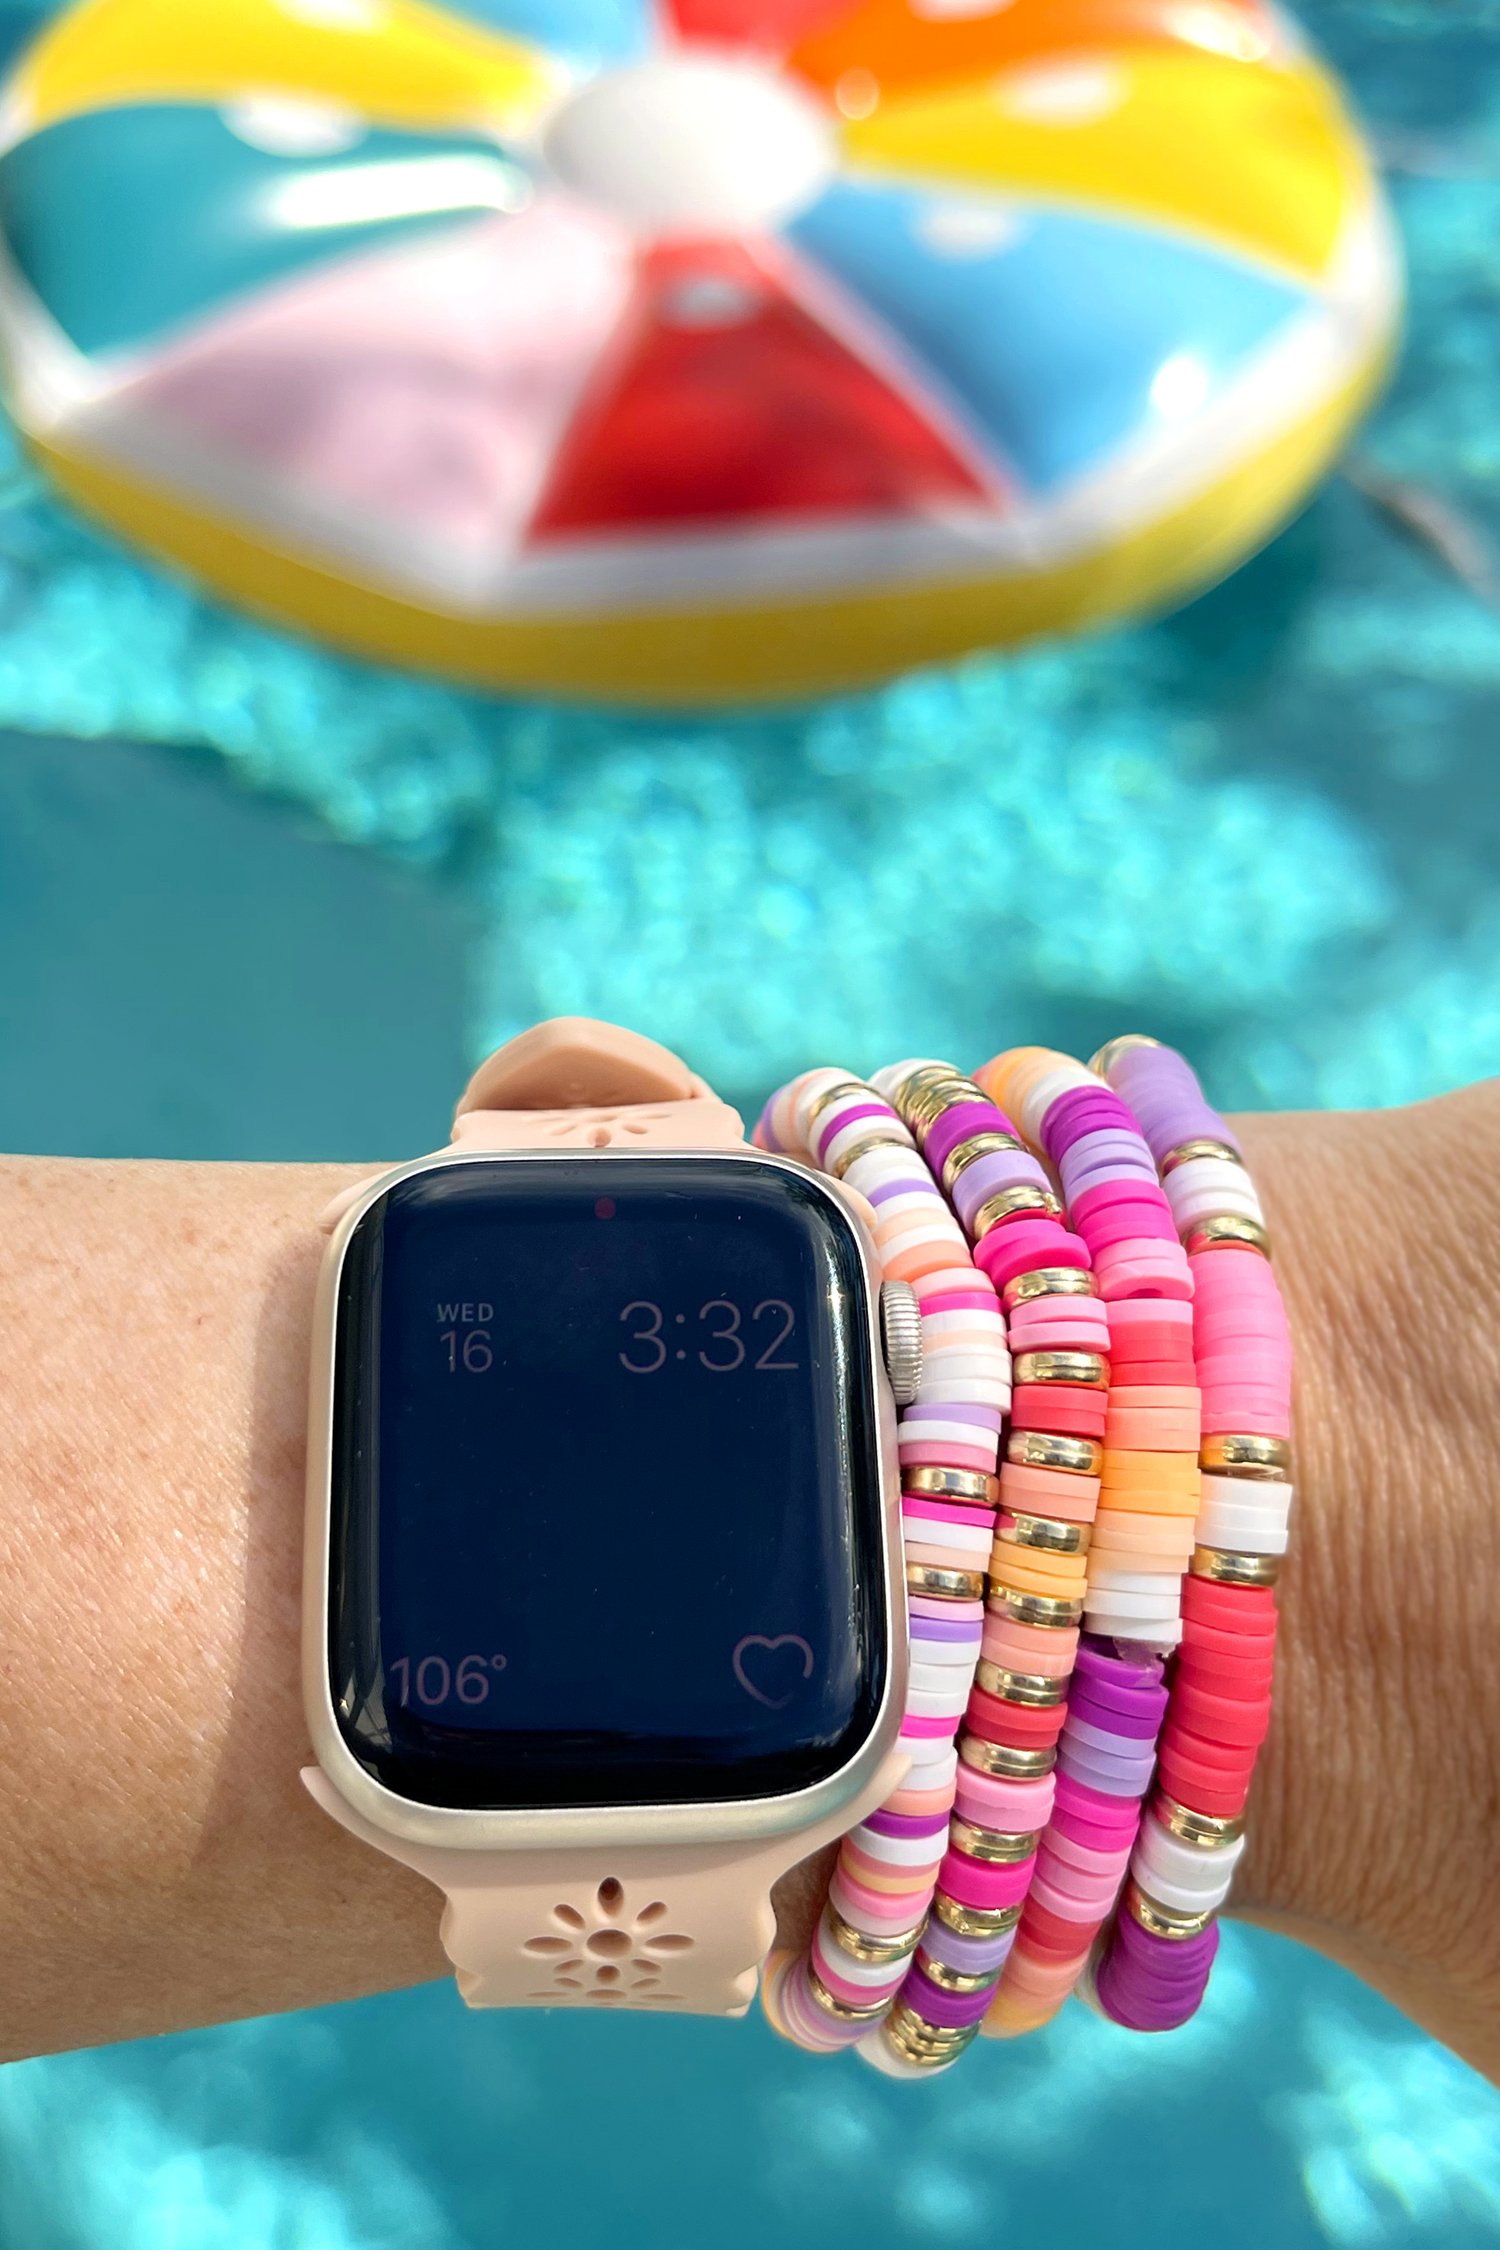 Colorful clay bead bracelets on wrist with watch by pool with floatie